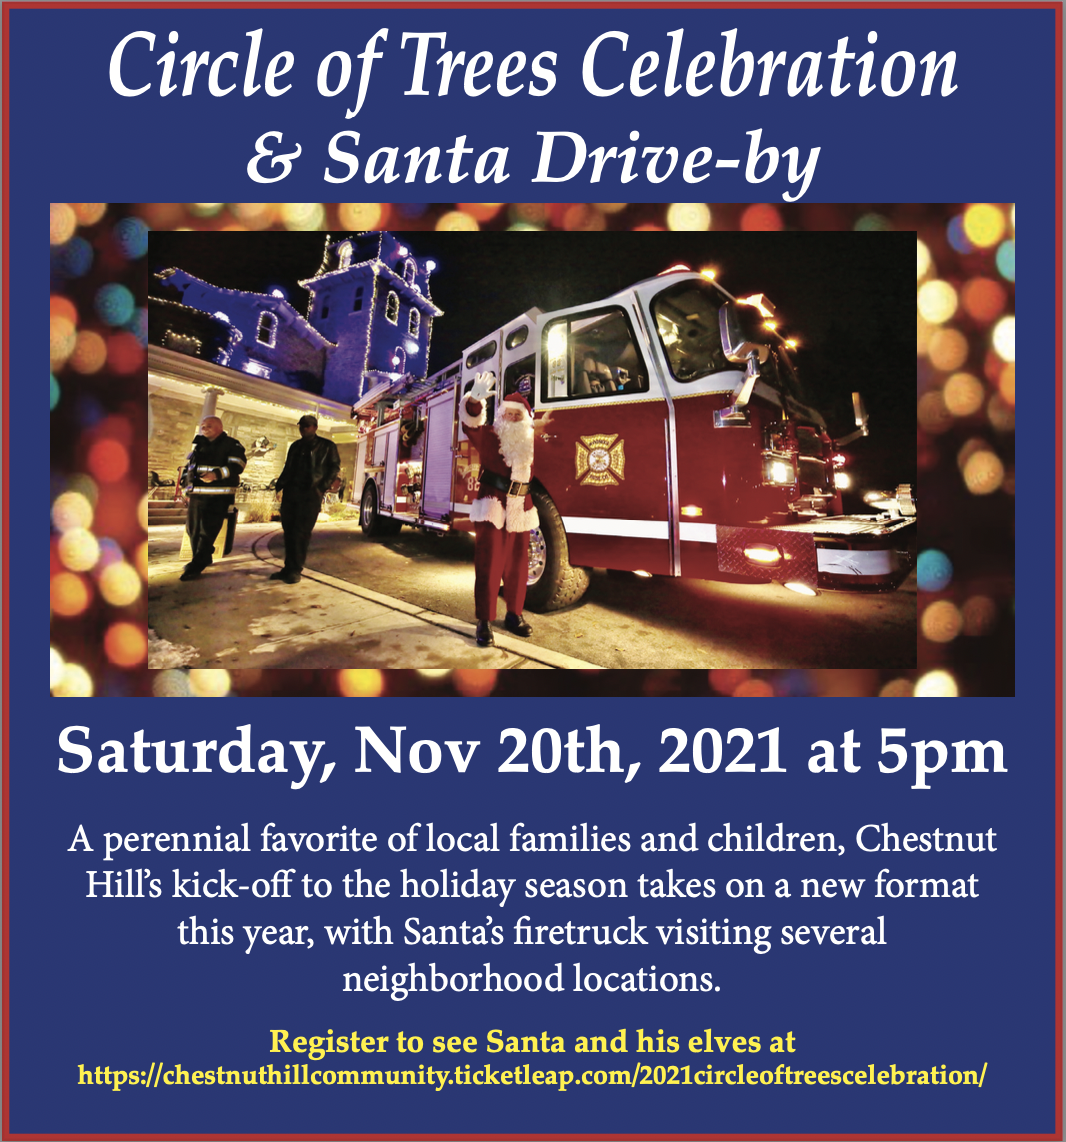 https://chestnuthill.org/circle_of_trees_celebration.php